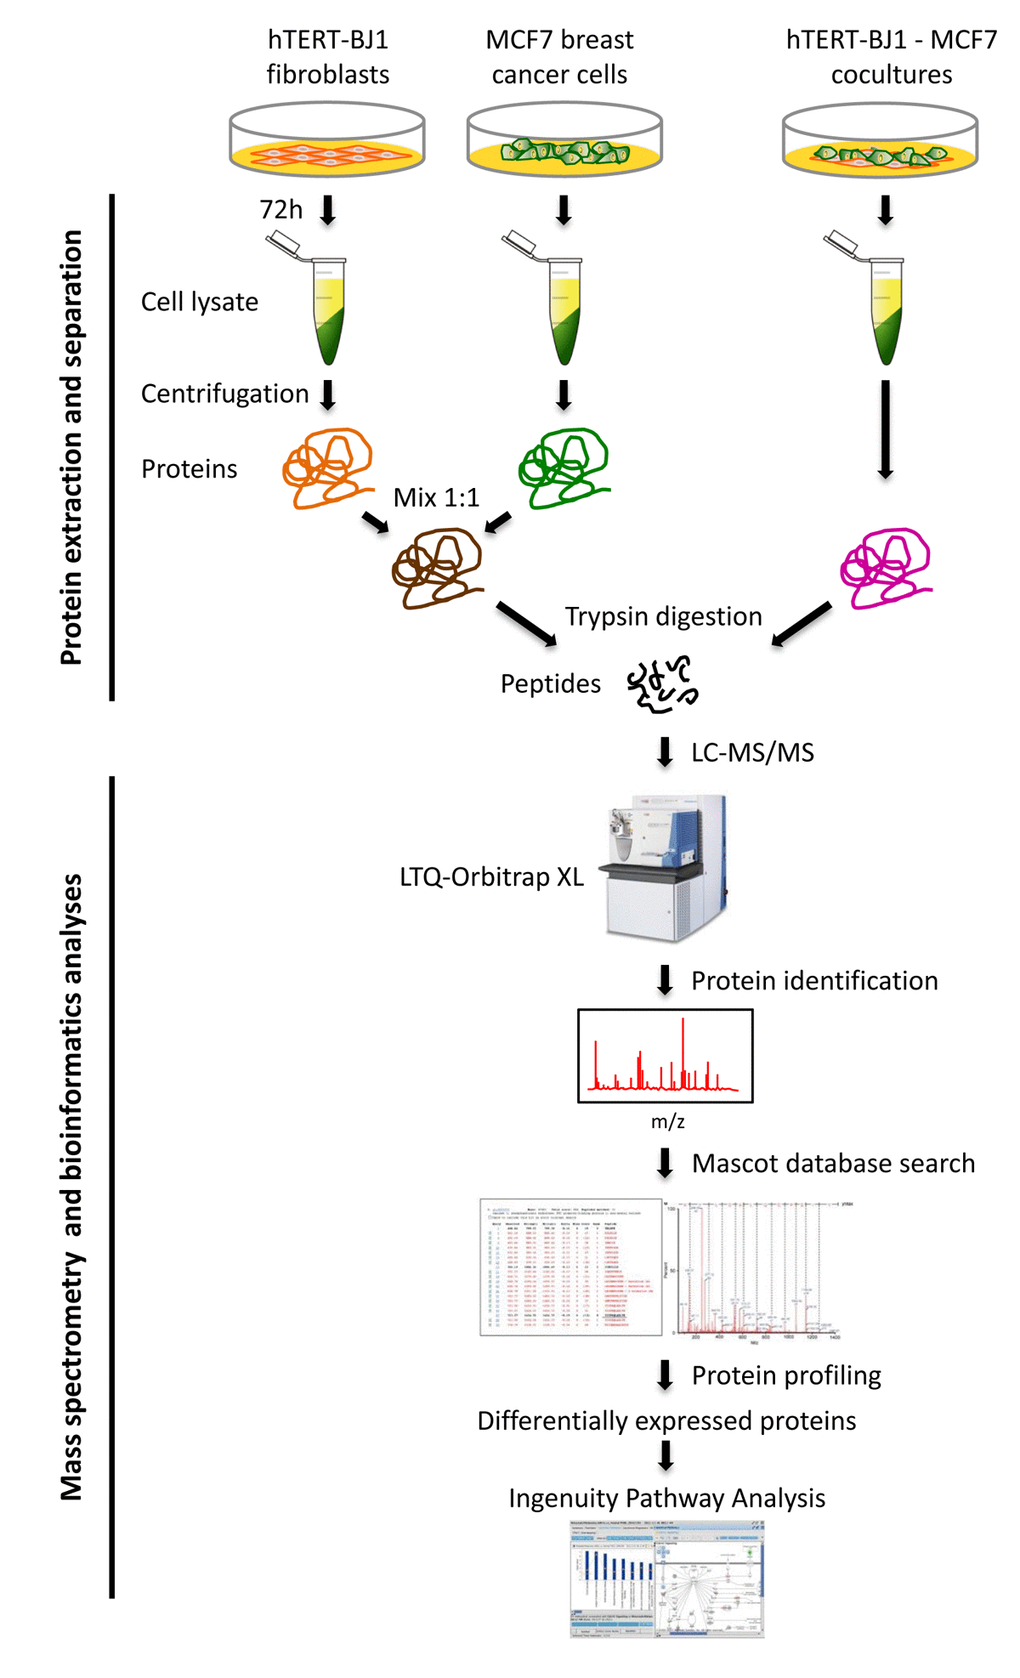 Schematic diagram summarizing the work‐flow for MCF7‐fibroblast co‐culture studies and bioinformatics validation. Protein lysates were obtained from hTERT‐BJ1 fibroblasts after 72 h co‐culture with MCF7 breast cancer cells. Alternatively, protein lysates were obtained from hTERT‐BJ1 fibroblasts and MCF7 cells cultured separately as monolayers and then mixed. Peptides obtained after trypsin digestion were analysed via LC‐MS/MS on an LTQ‐ Orbitrap XL mass spectrometer. Label‐free quantitative proteomics was used to detect changes in protein abundances across co‐cultures and mixed cell population extracts. The proteomics data sets were further analyzed using Ingenuity Pathway Analysis. This co‐culture approach is predicted to better simulate the fibroblast‐rich local tumor micro‐environment in vivo.